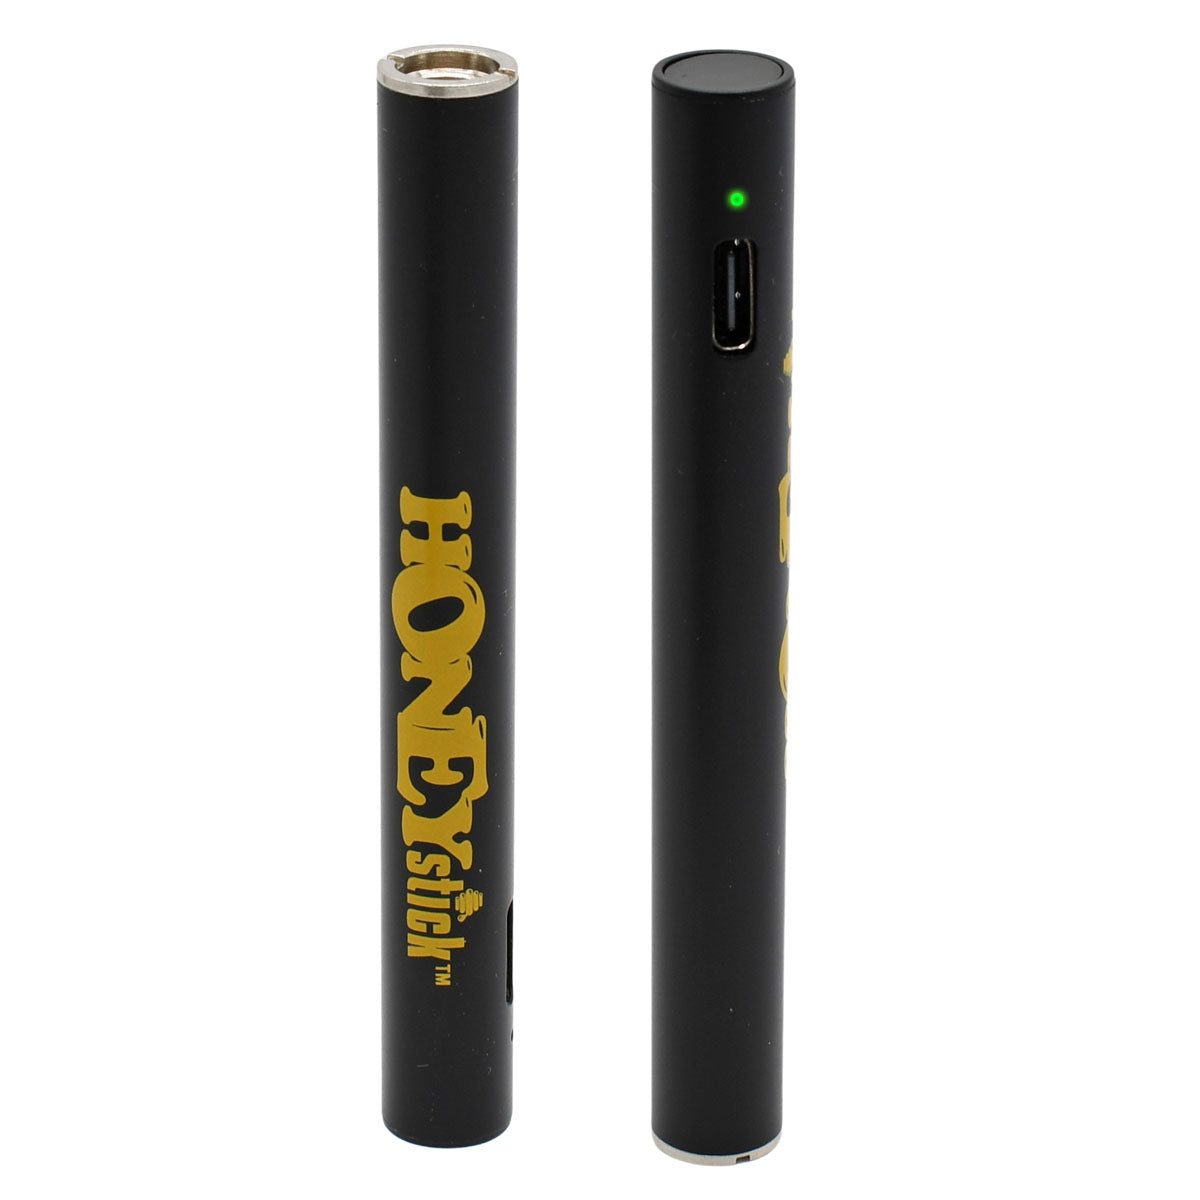 Auto Draw 510 Vape Battery - front with 510 thread and back with USB-C charging port and LED light indicator